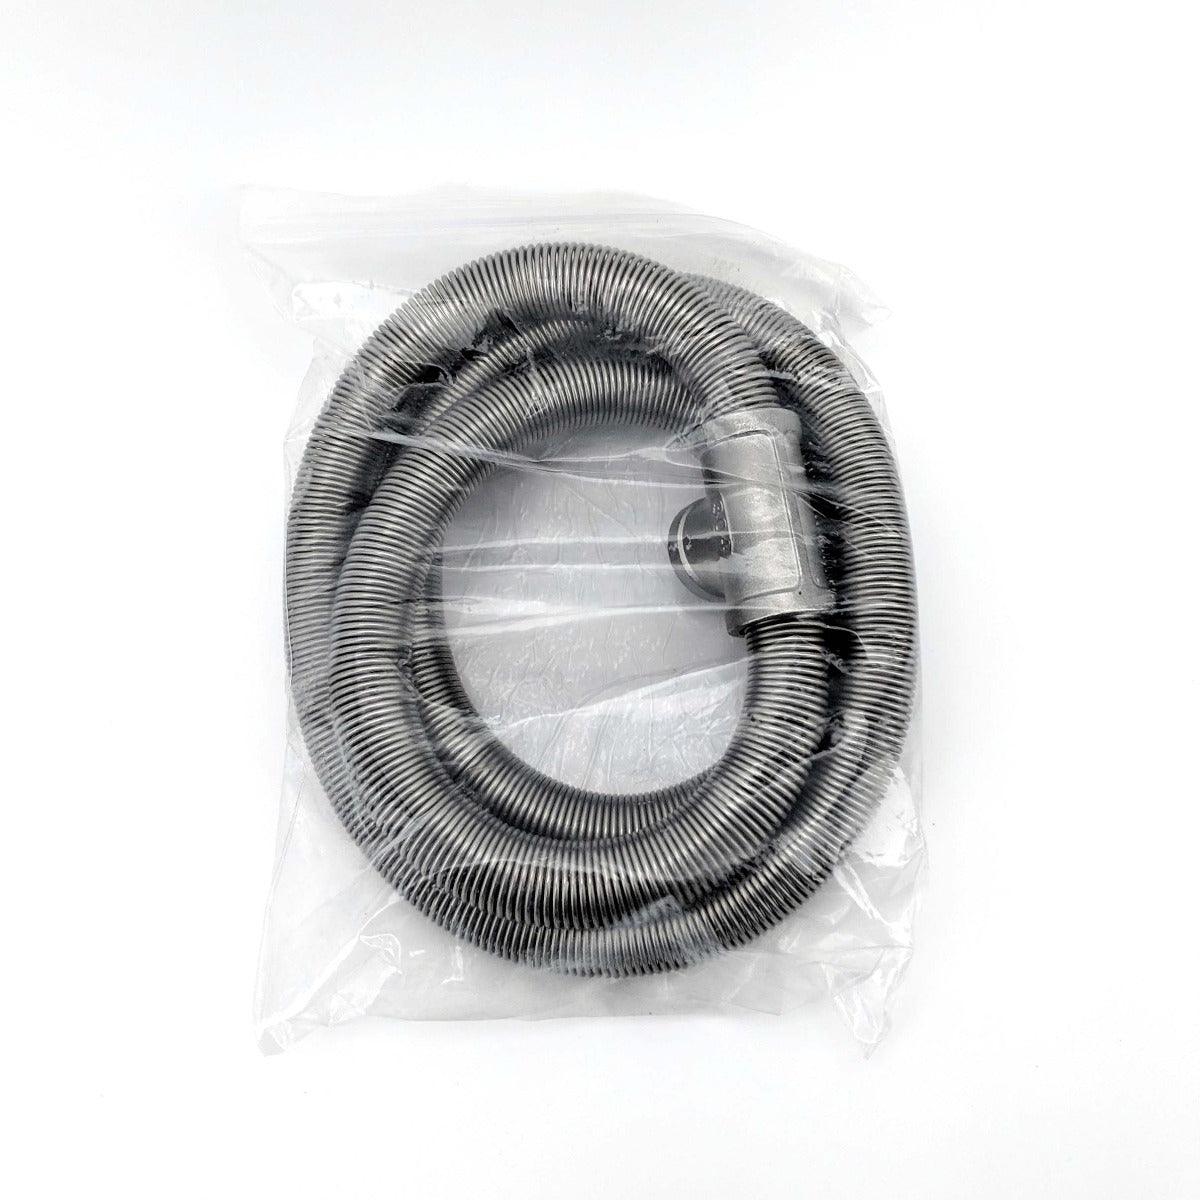 Stainless steel Helix Coil 1m with Tee - KegLand